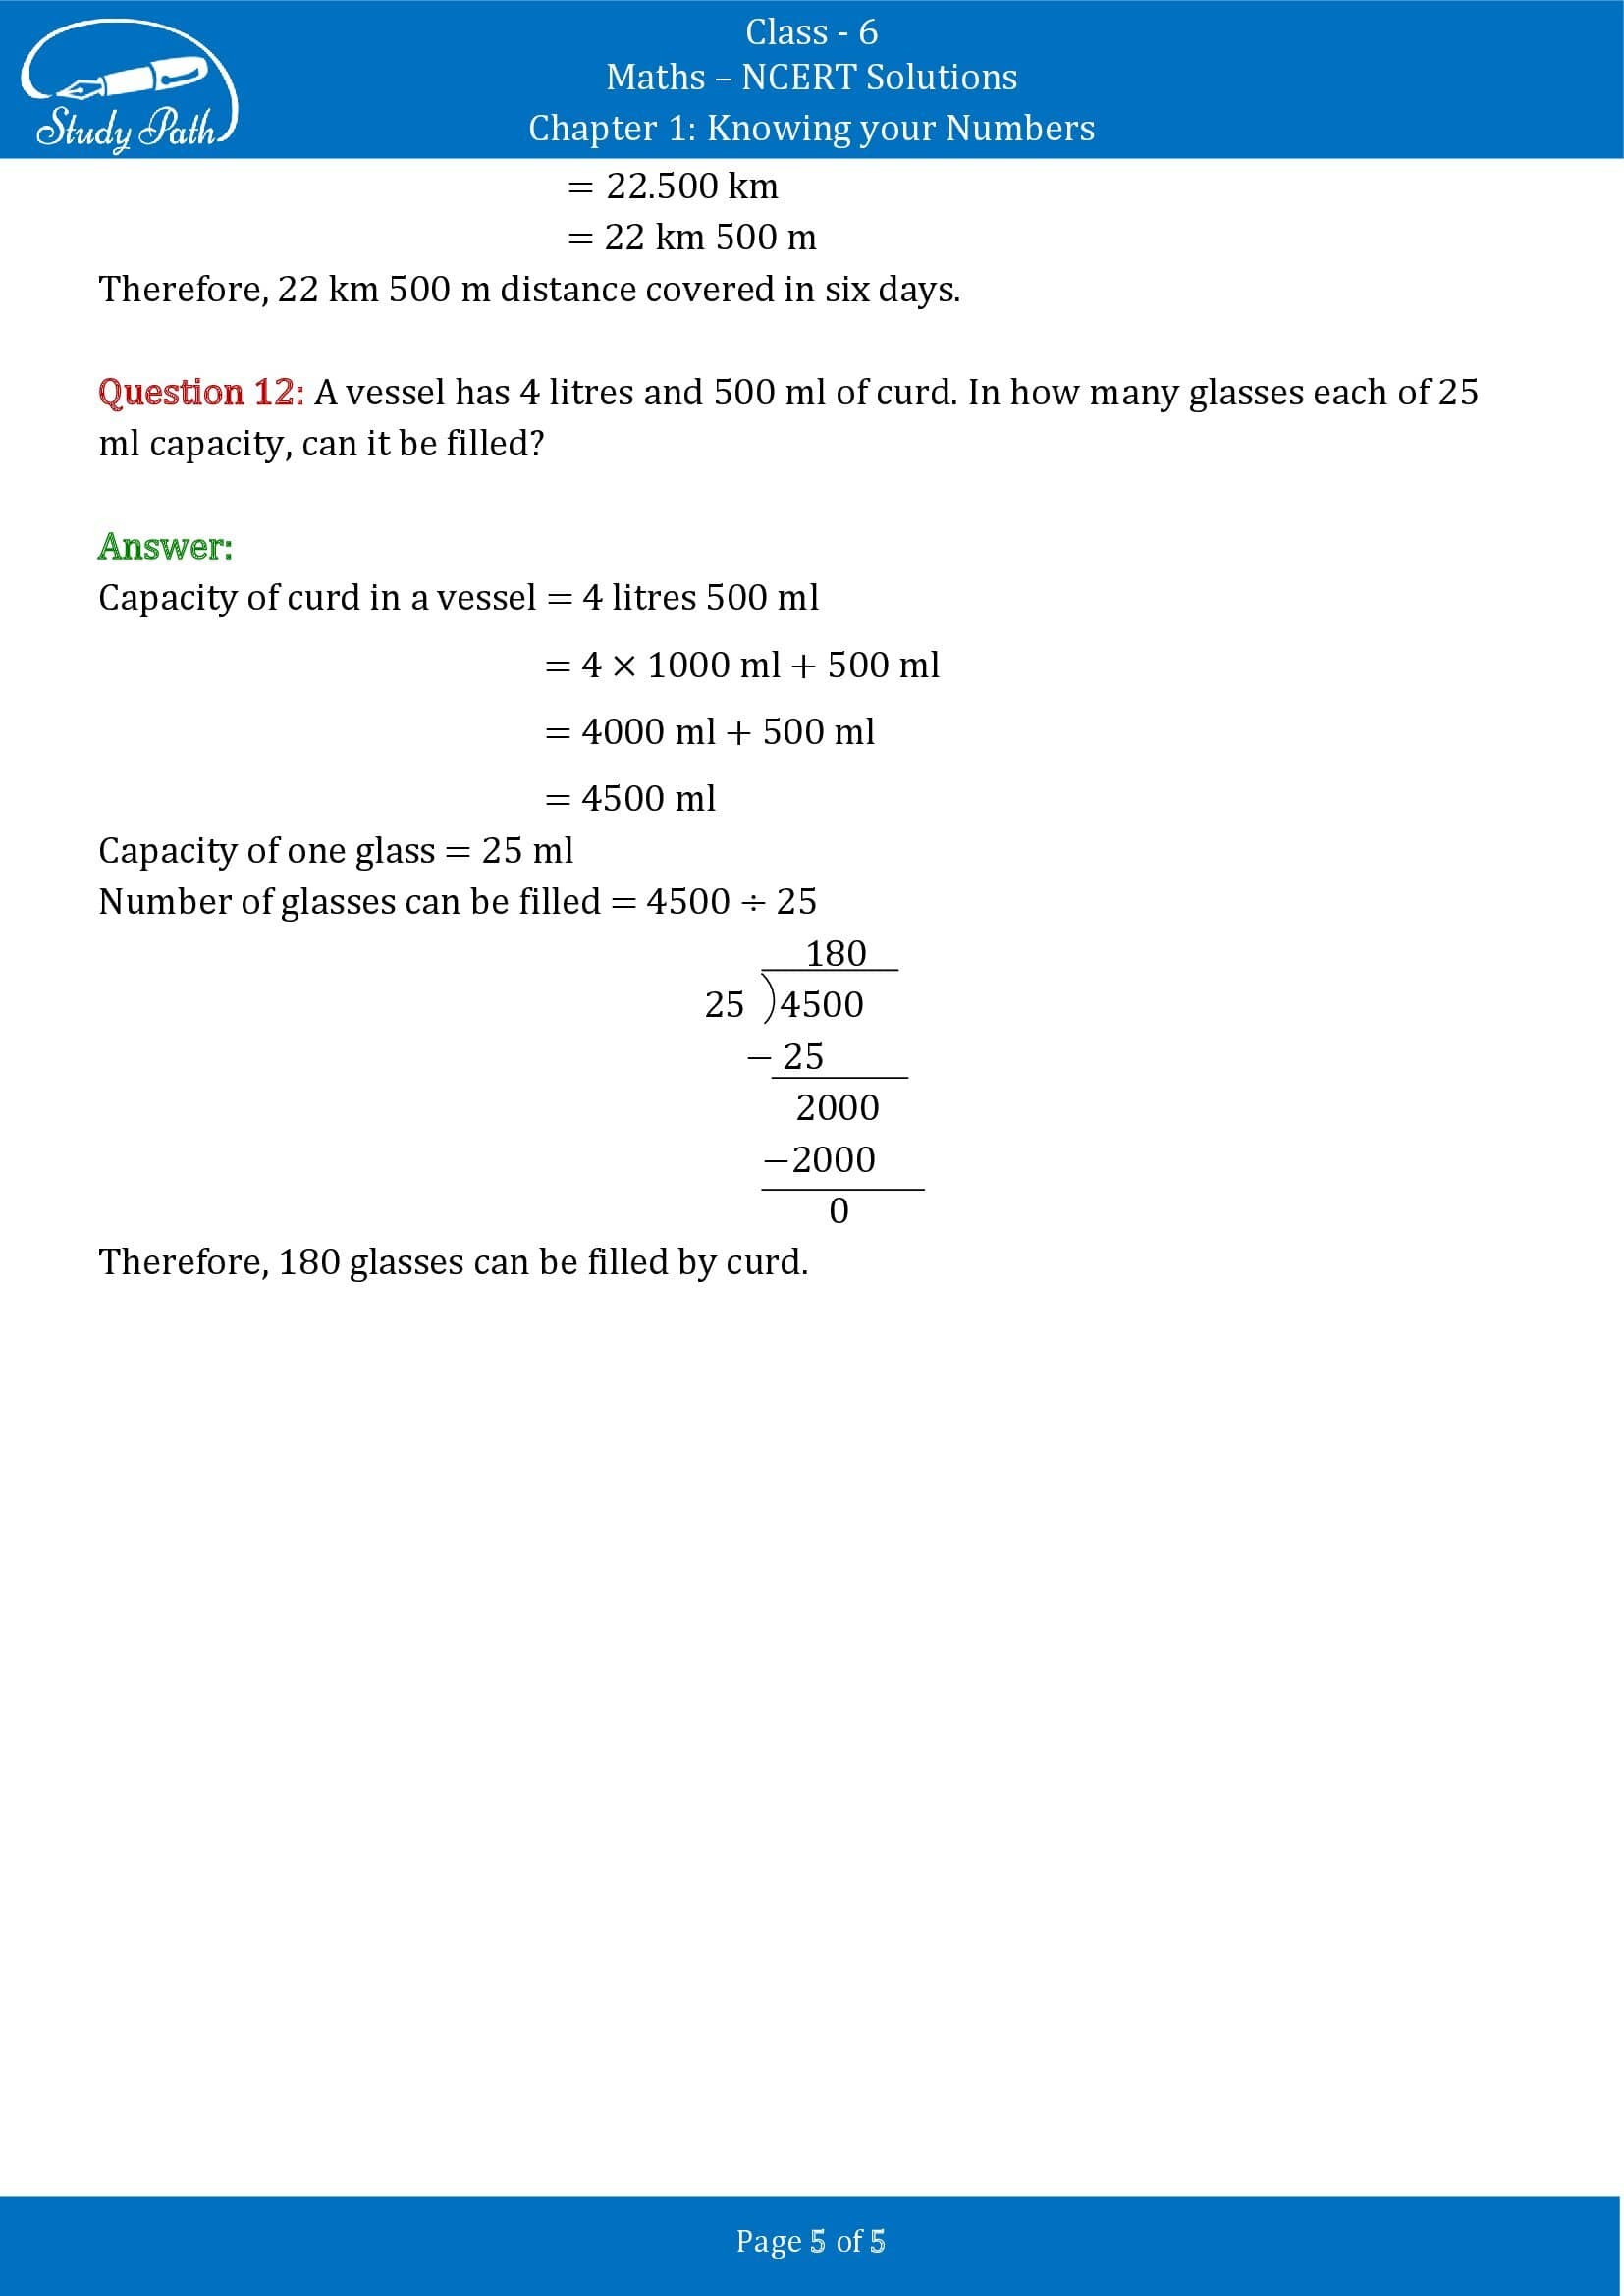 NCERT Solutions for Class 6 Maths Chapter 1 Knowing Your Numbers Exercise 1.2 00005